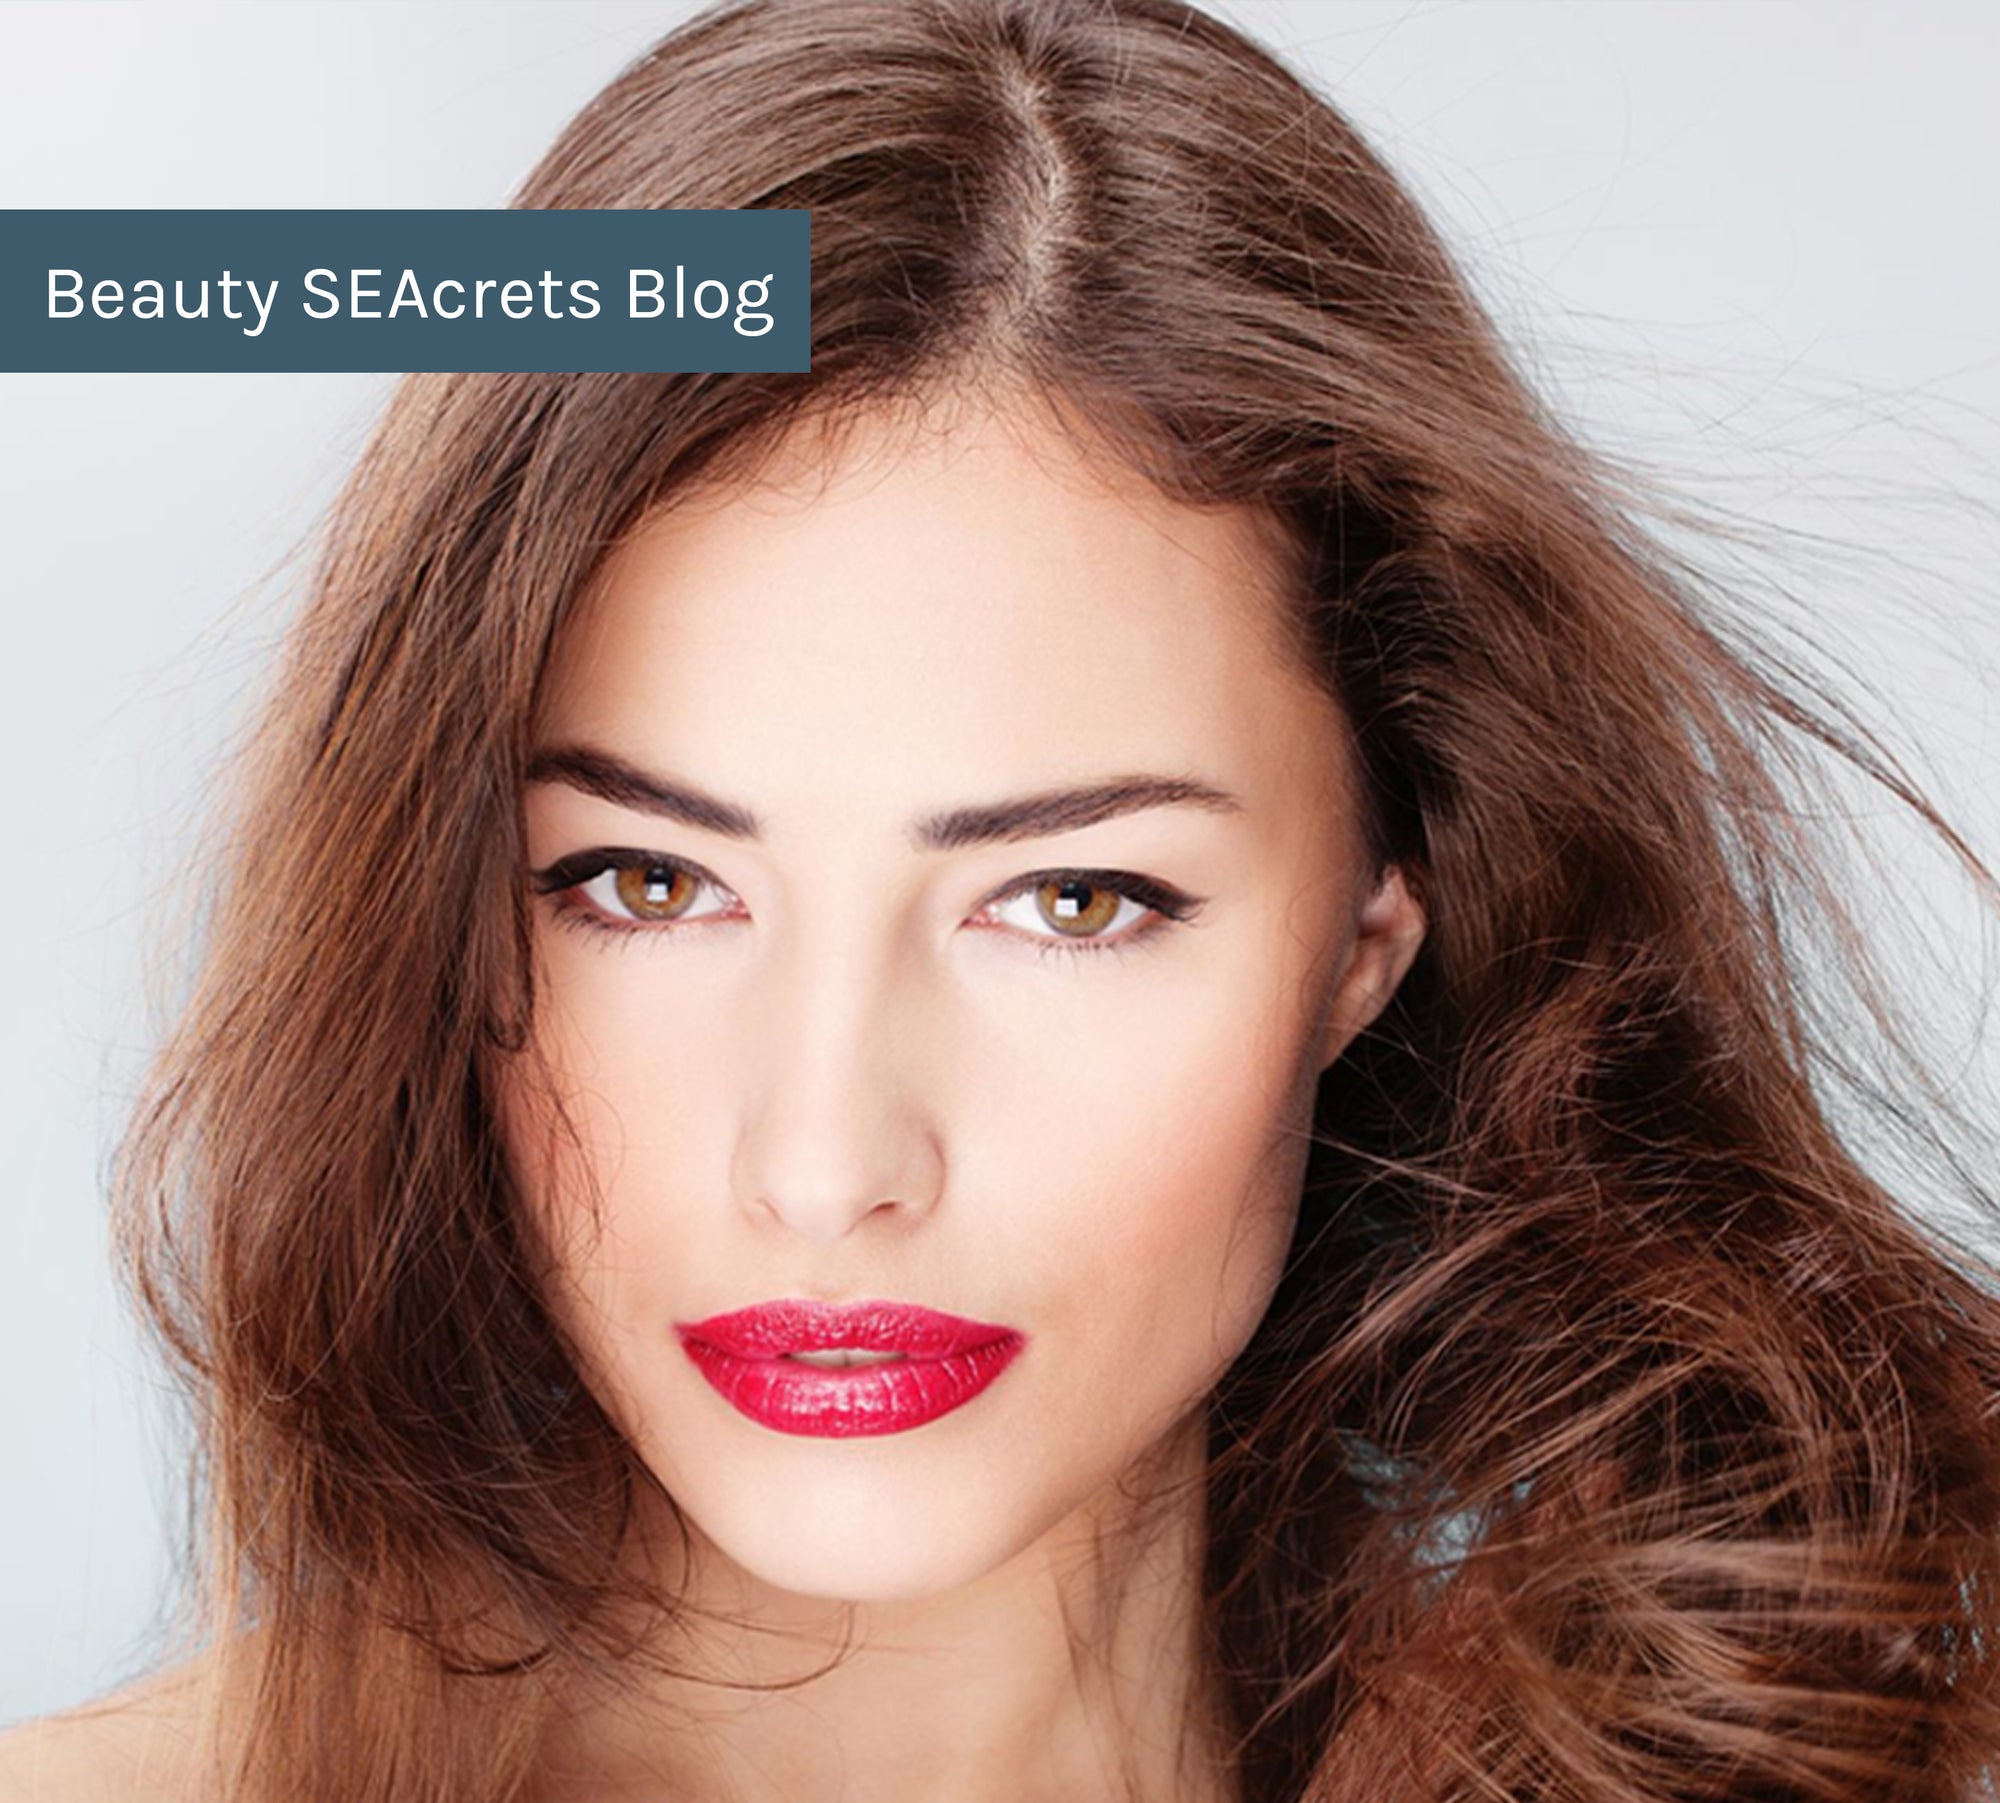 7 Reasons to Date an Esthetician